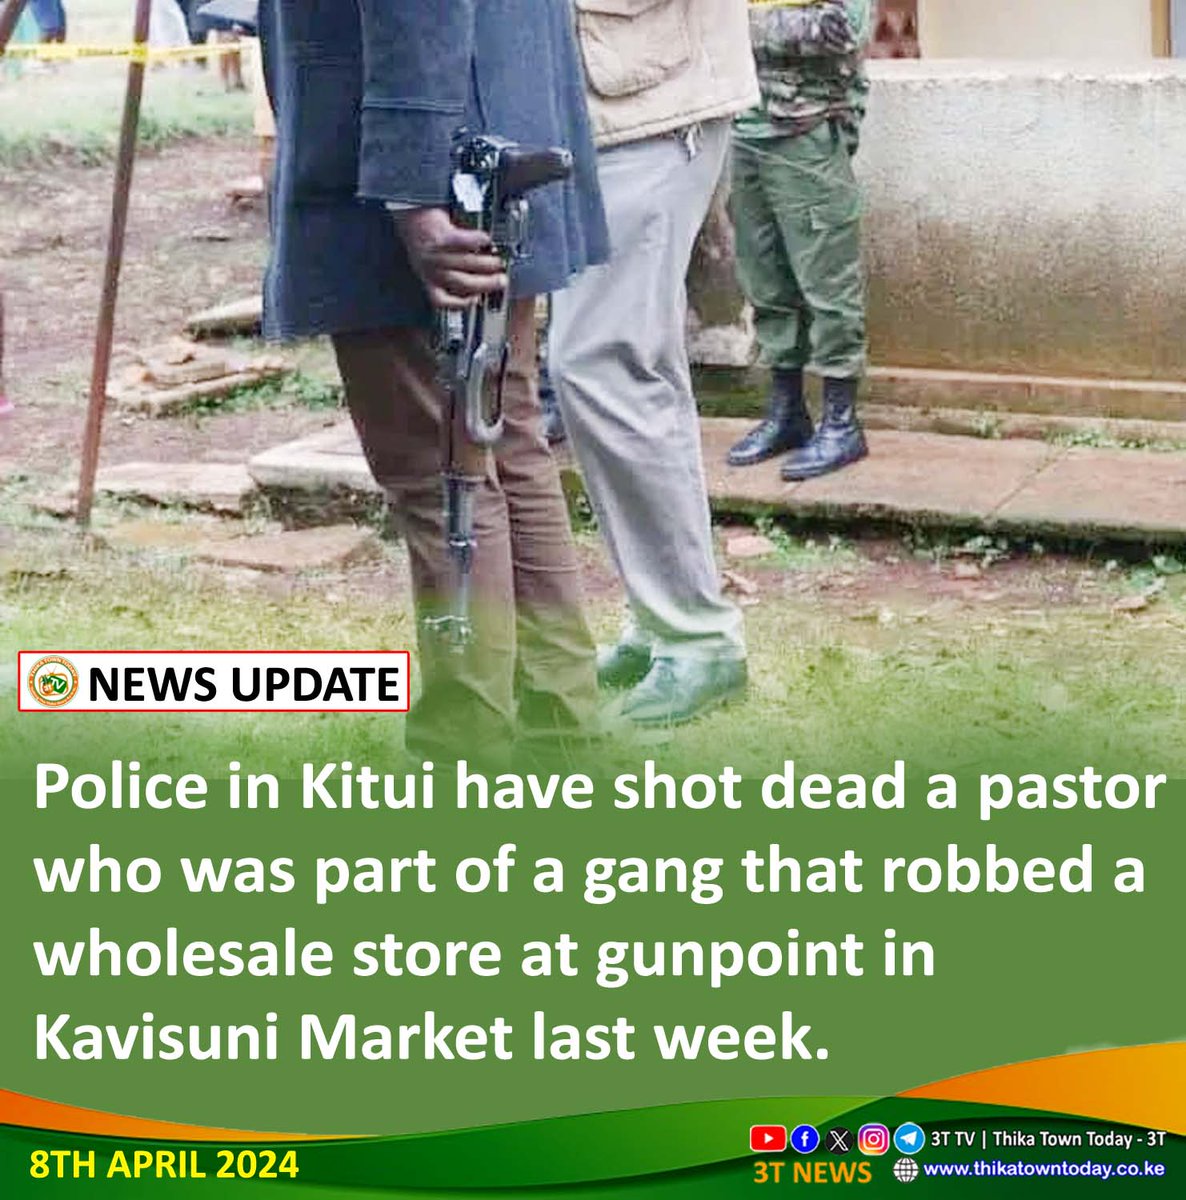 Police in Kitui have shot dead a pastor who was part of a gang that robbed a wholesale store at gunpoint in Kavisuni Market last week.

The slain pastor was a preacher at the Heaven City Chapel based at Soweto area. His accomplice, a fellow worshipper escaped with gunshot wounds.